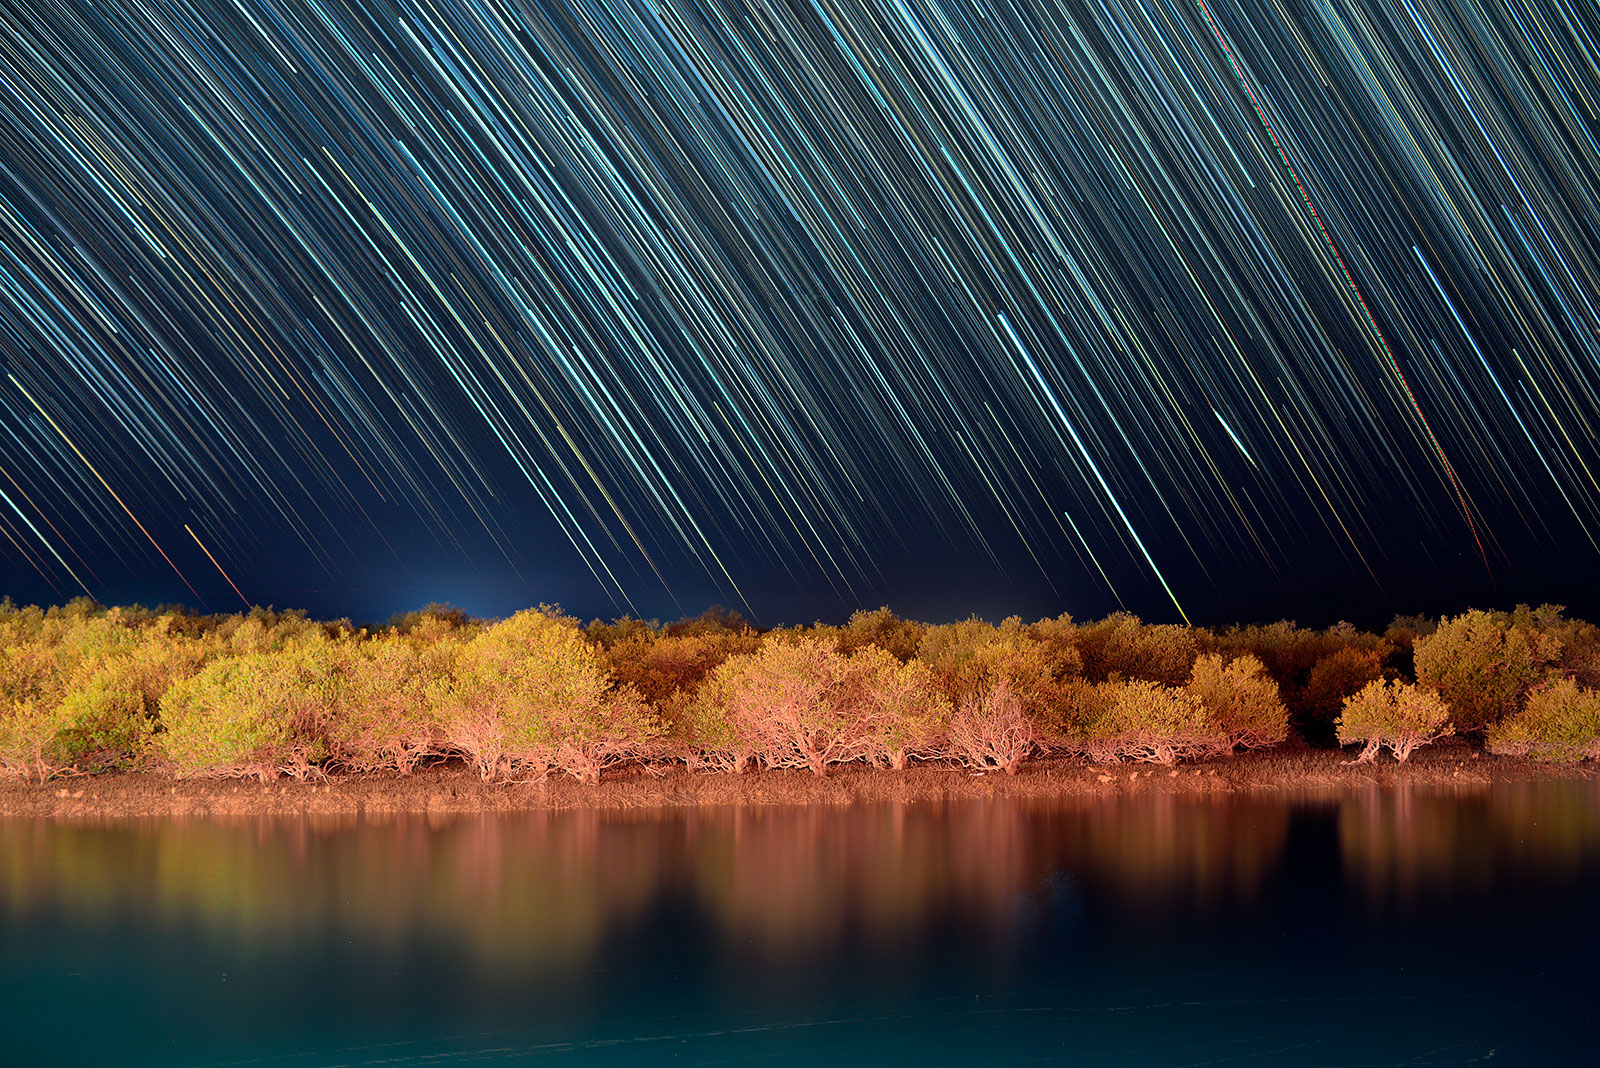 Star trails above mangrove forest which grows at the northern part of Persian Gulf. 700 individual images consequently captured through opera 50mm F1.4 FF at f/2.2 to create this shot. Kenko Red Enhancer No.1 + Cokin P123S reversely attached to the lens to control local light pollution and balancing exposure between illuminated foreground and dark sky. Each frame exposed 5 sec at ISO4000 on Nikon D610 body.